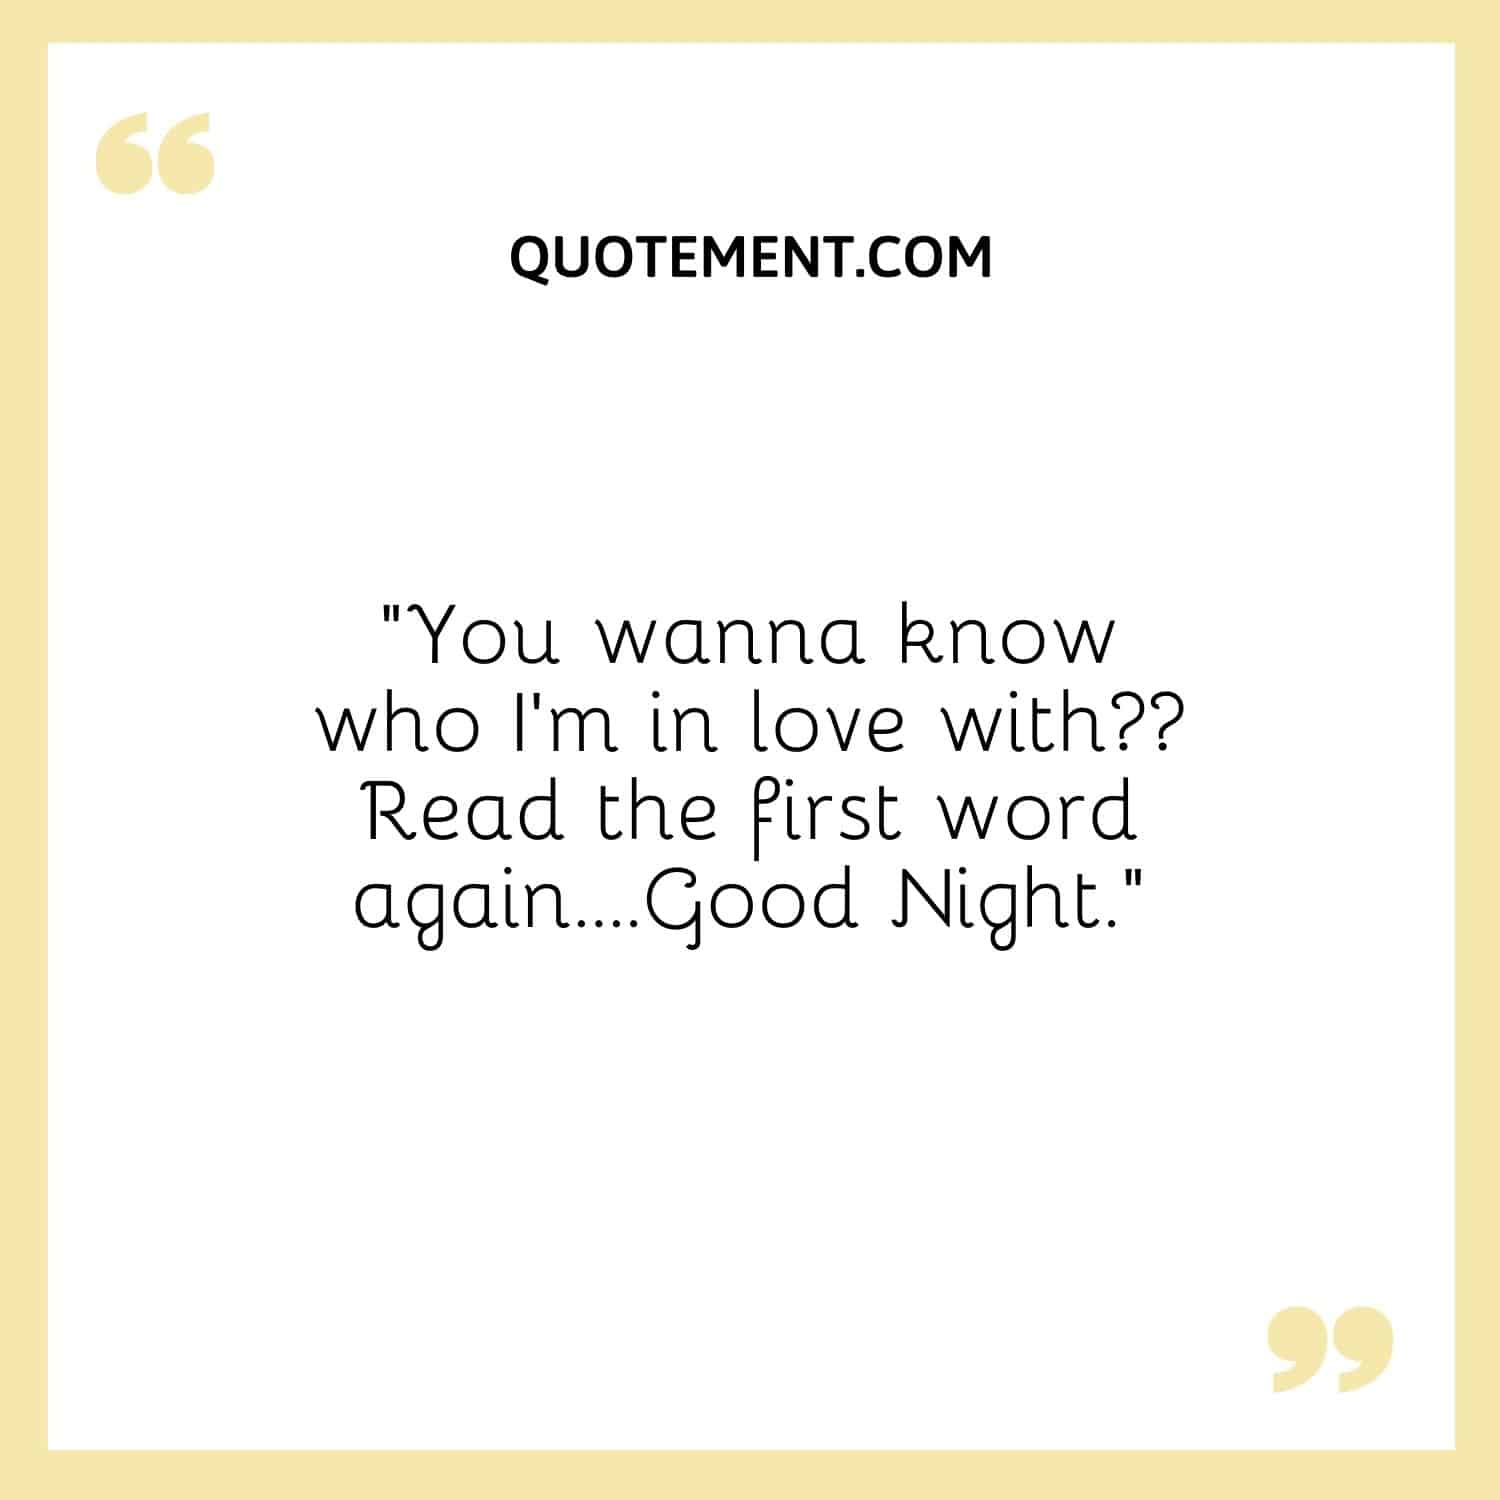 “You wanna know who I’m in love with Read the first word again….Good Night.”